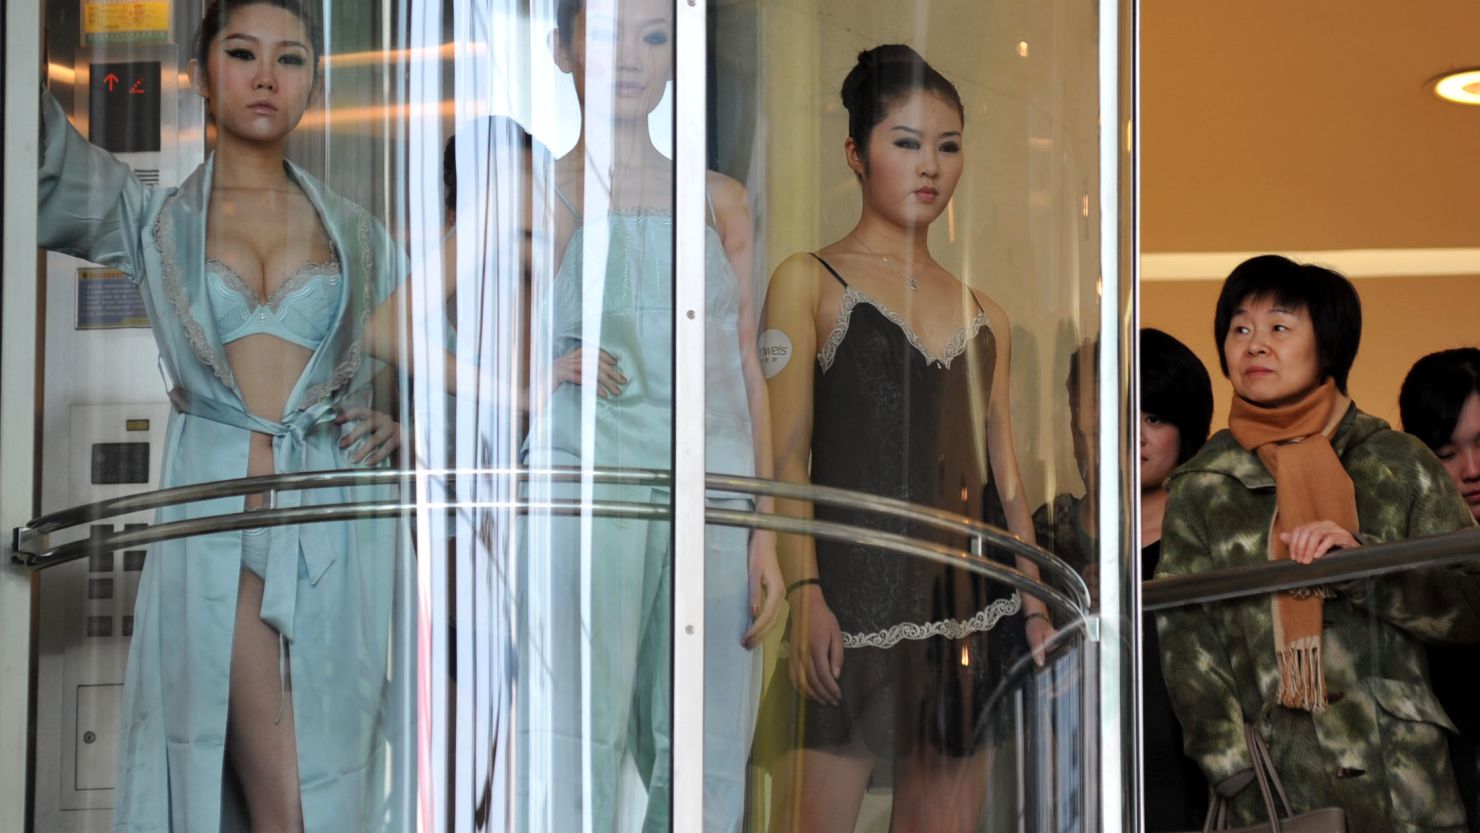 Models pose during a lingerie show on International Women's Day at a shopping mall in 2011 in Qingdao, Shandong.